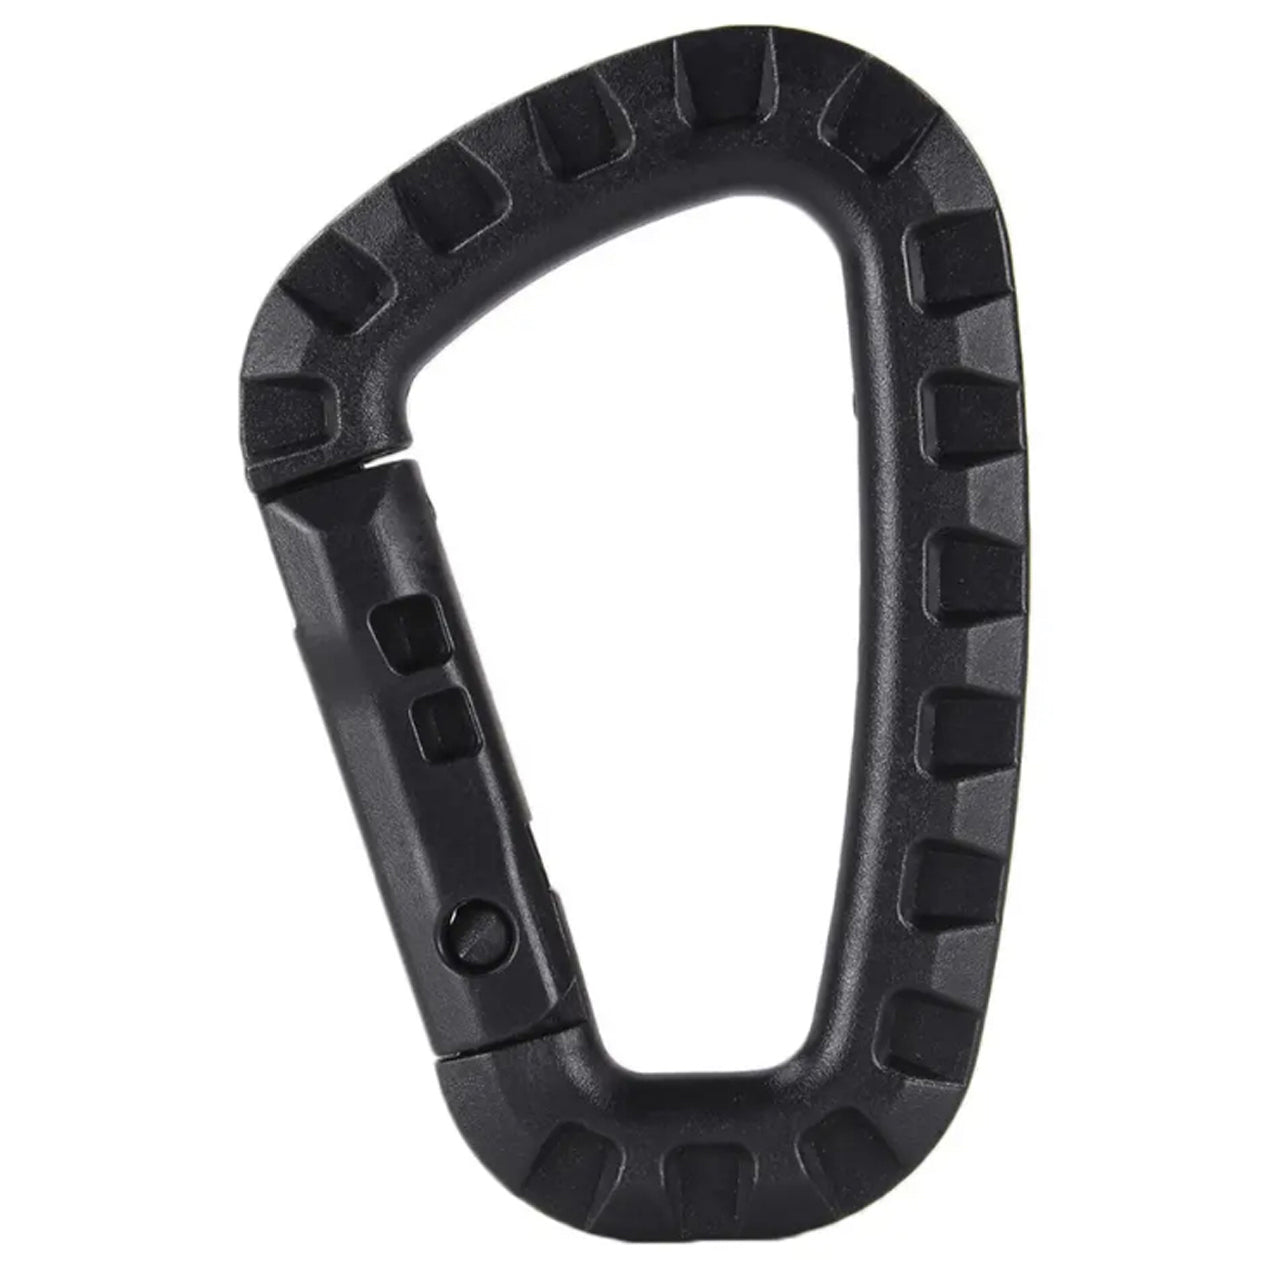 These firm carabiners are very practical and helpful equipment items. The hanging and securing of equipment works easy. Material: ABS plastic Anti-sliding design Weight: 45g www.defenceqstore.com.au